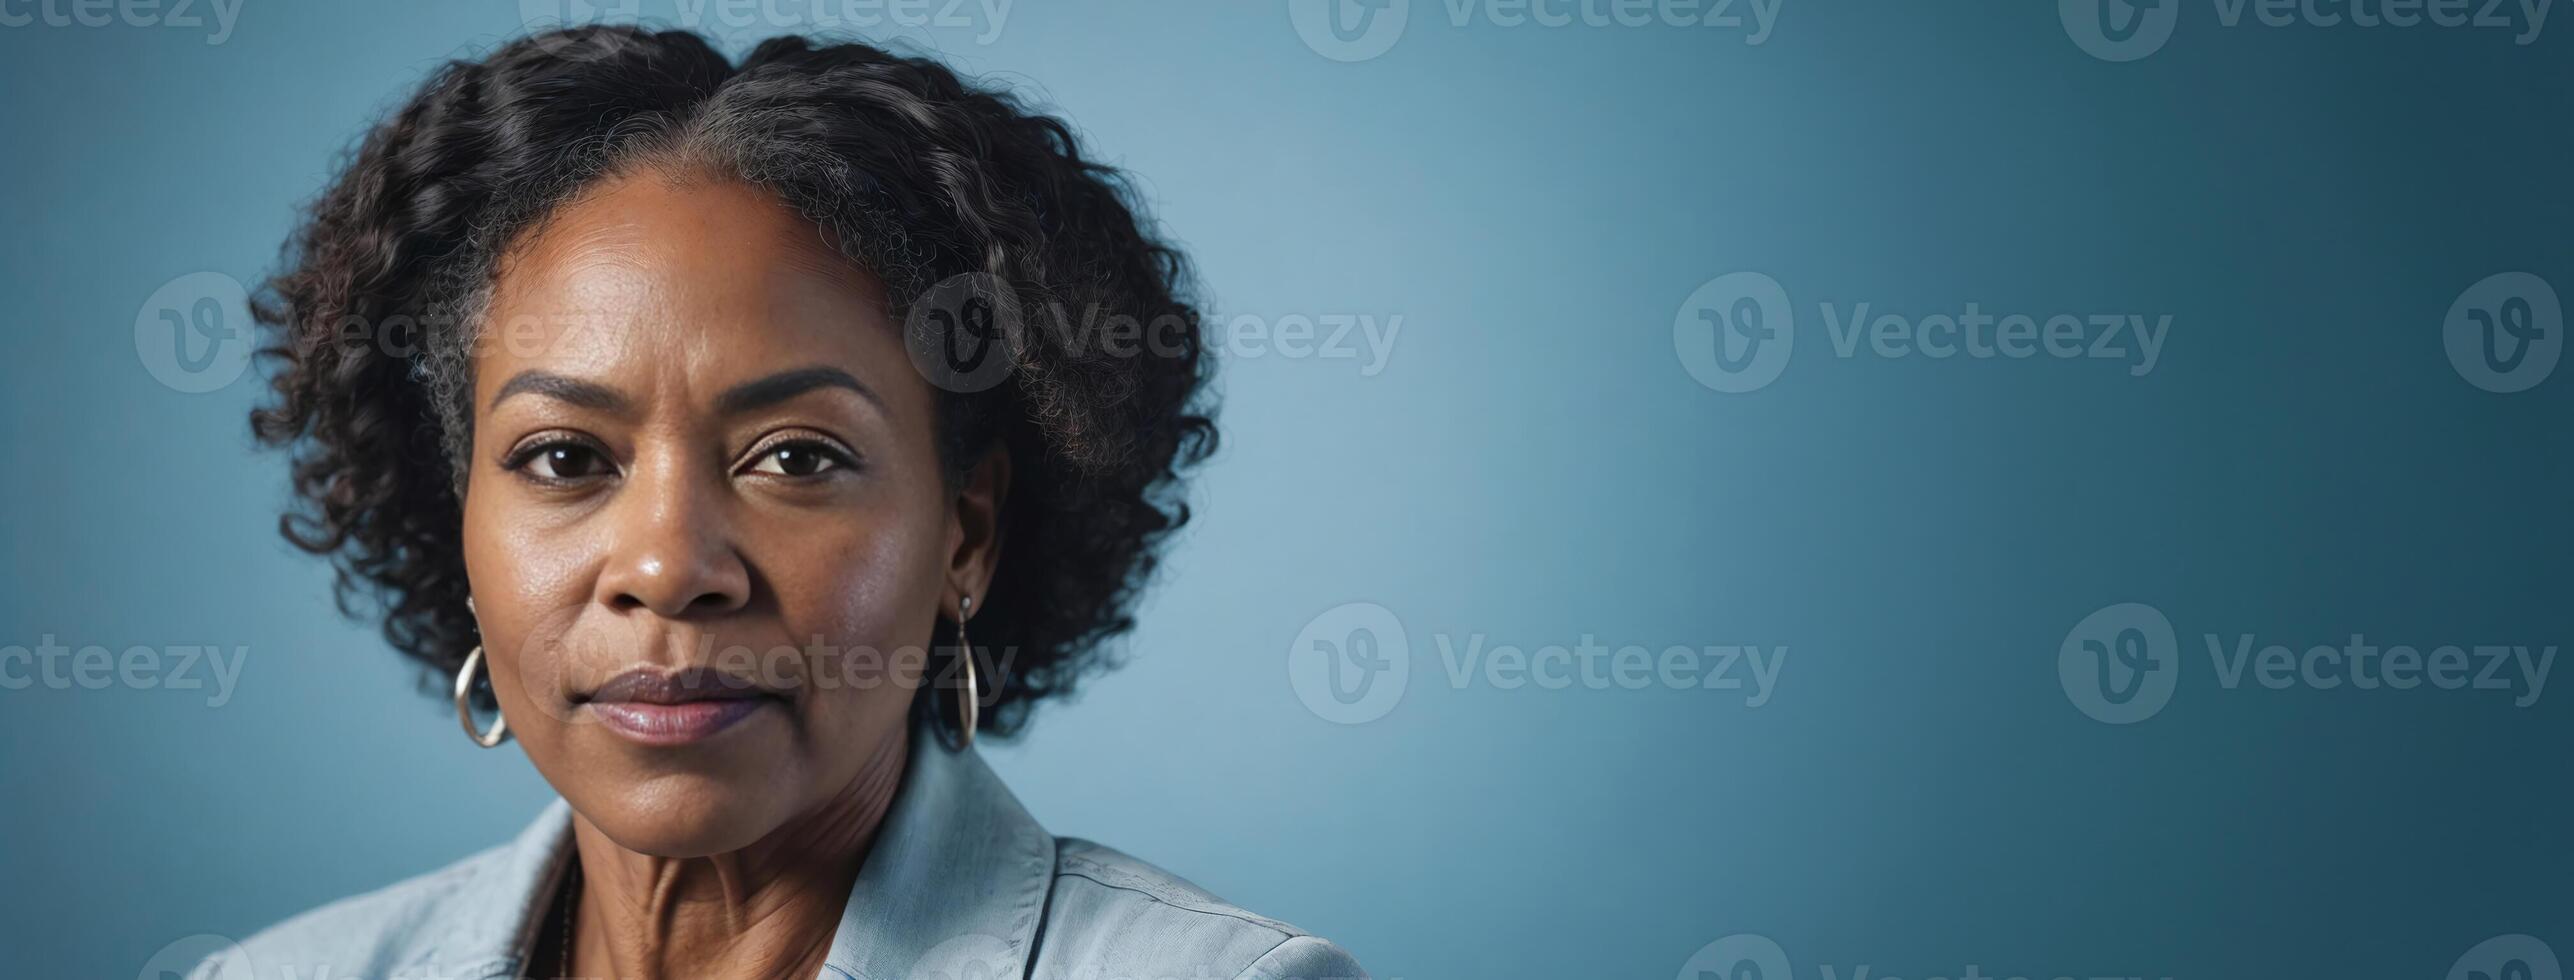 A 50S Adult African American Woman Isolated On A Ice Blue Background With Copy Space. photo